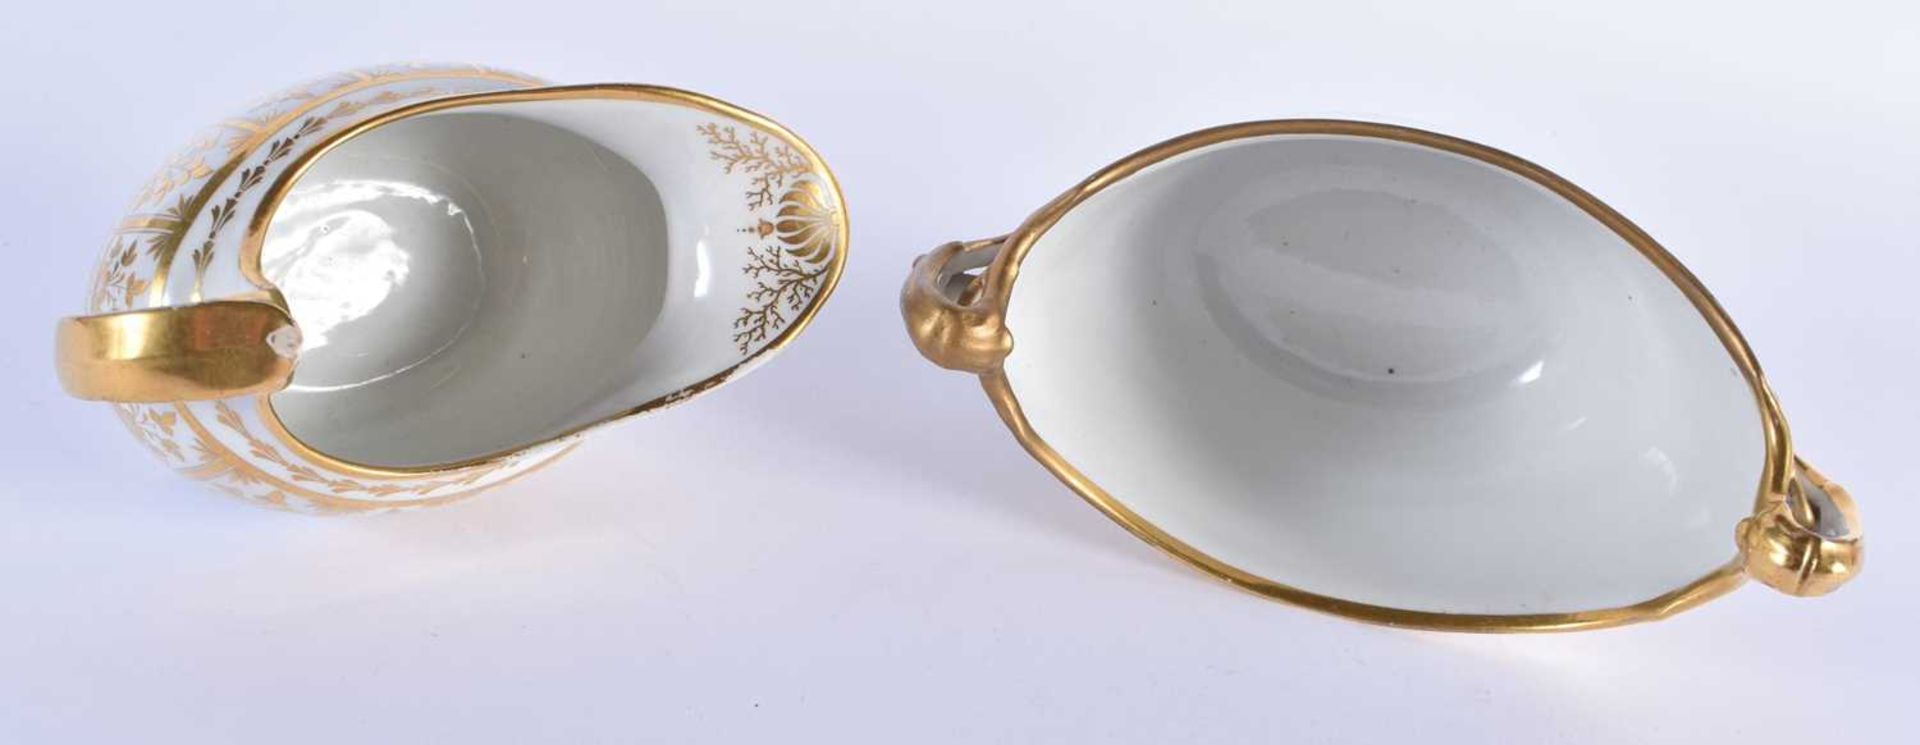 A LATE 18TH CENTURY GROUP OF BARR FLIGHT AND BARR PORCELAIN WARES painted with armorials on a - Image 10 of 31